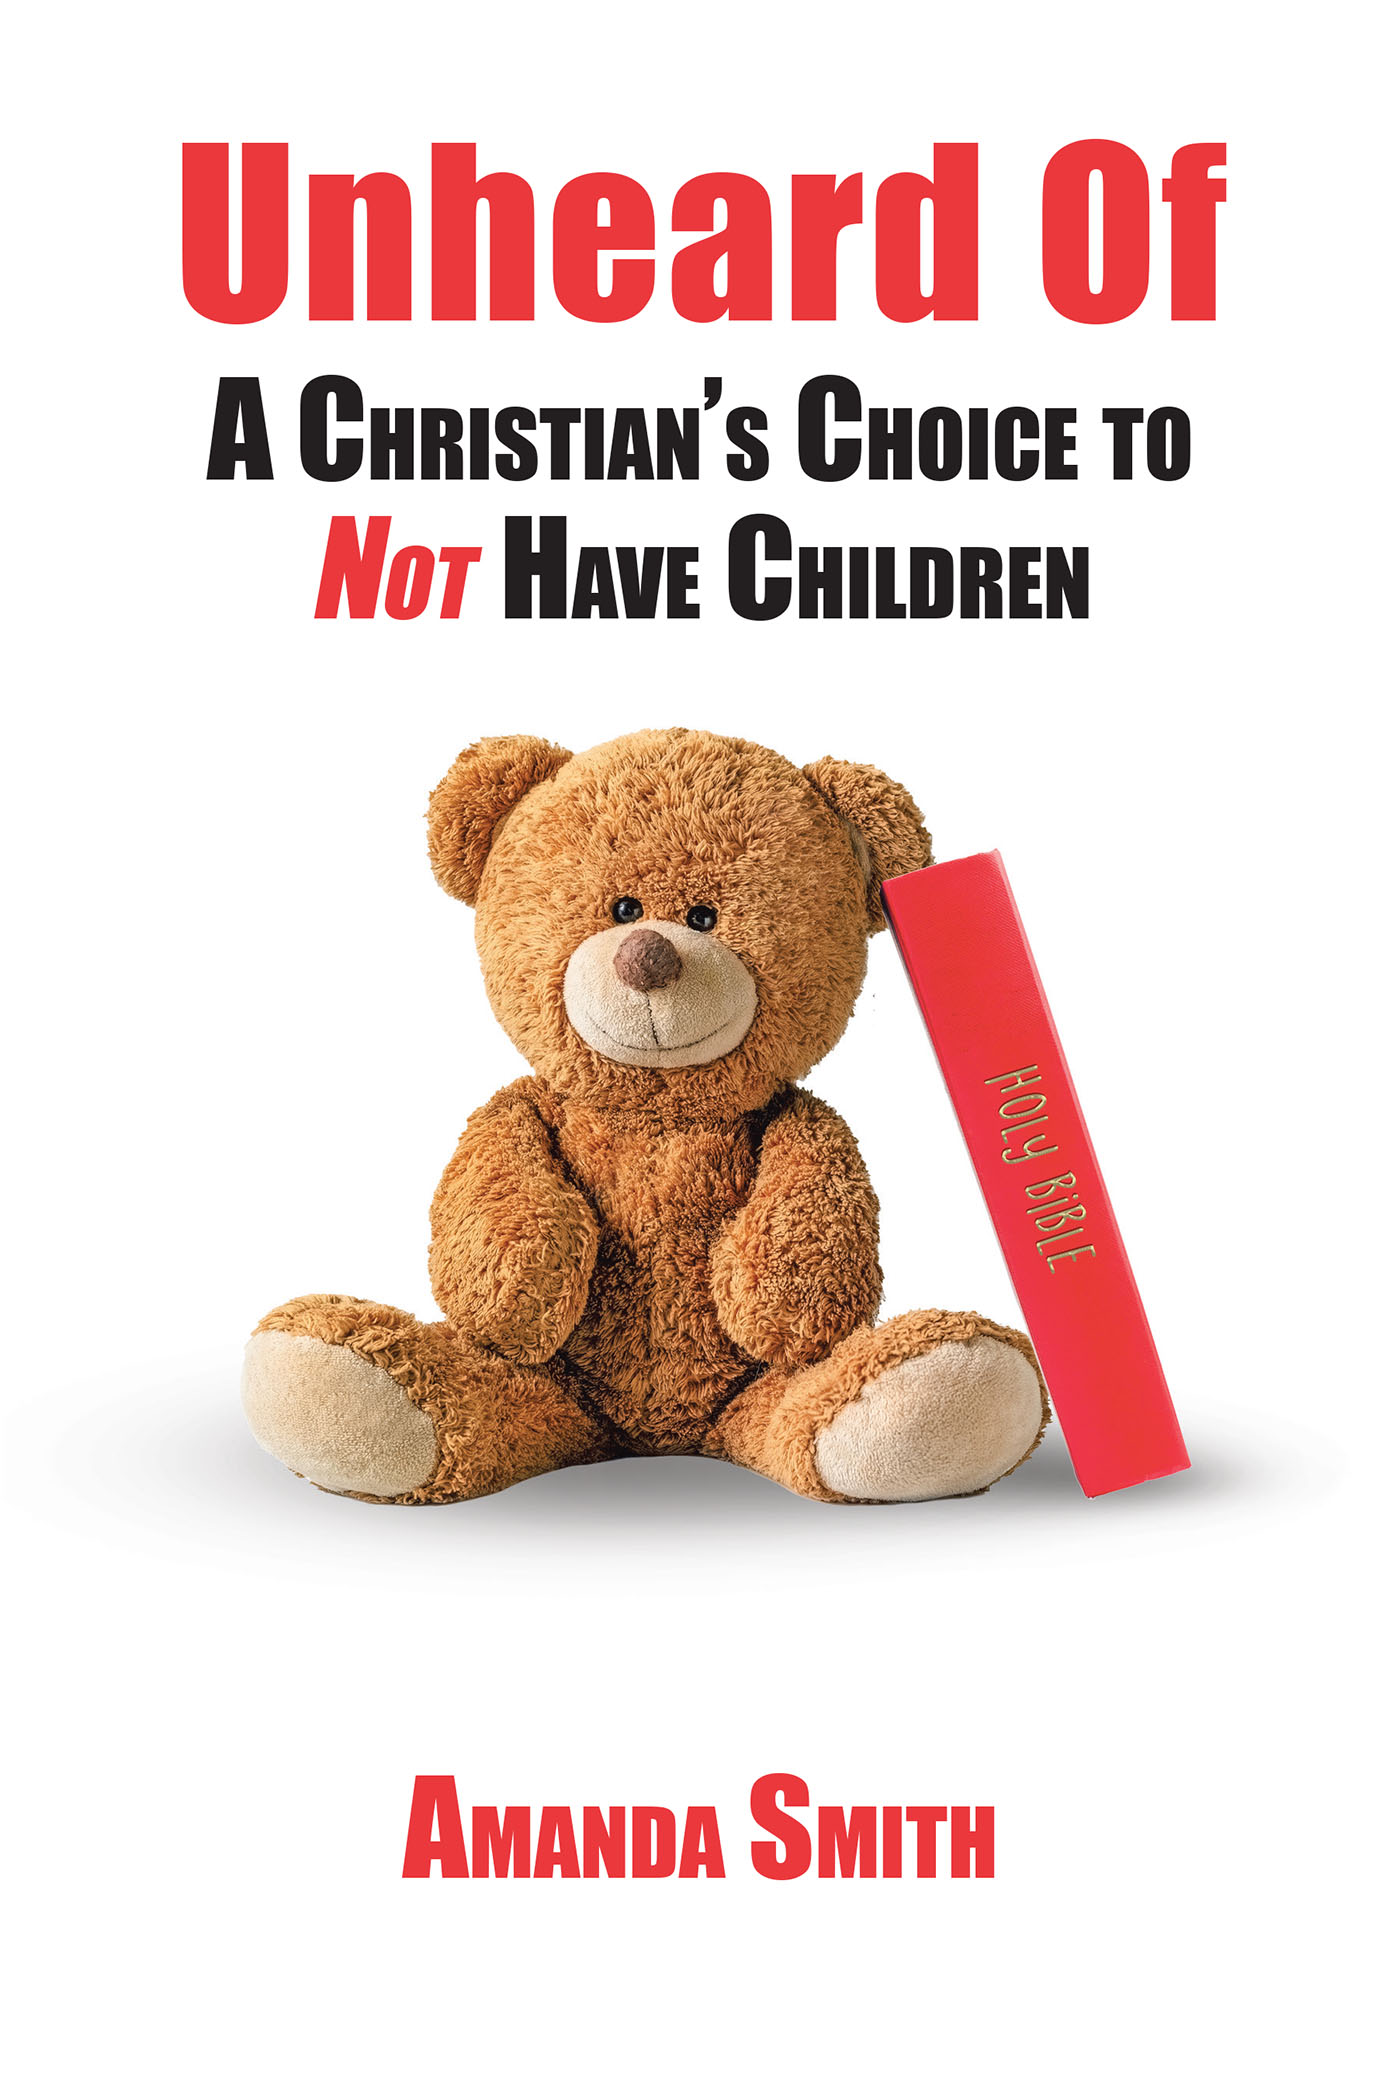 Amanda Smith’s Newly Released “Unheard Of: A Christian’s Choice to NOT Have Children” is a Thought-Provoking Discussion of the Active Choice Not to Procreate